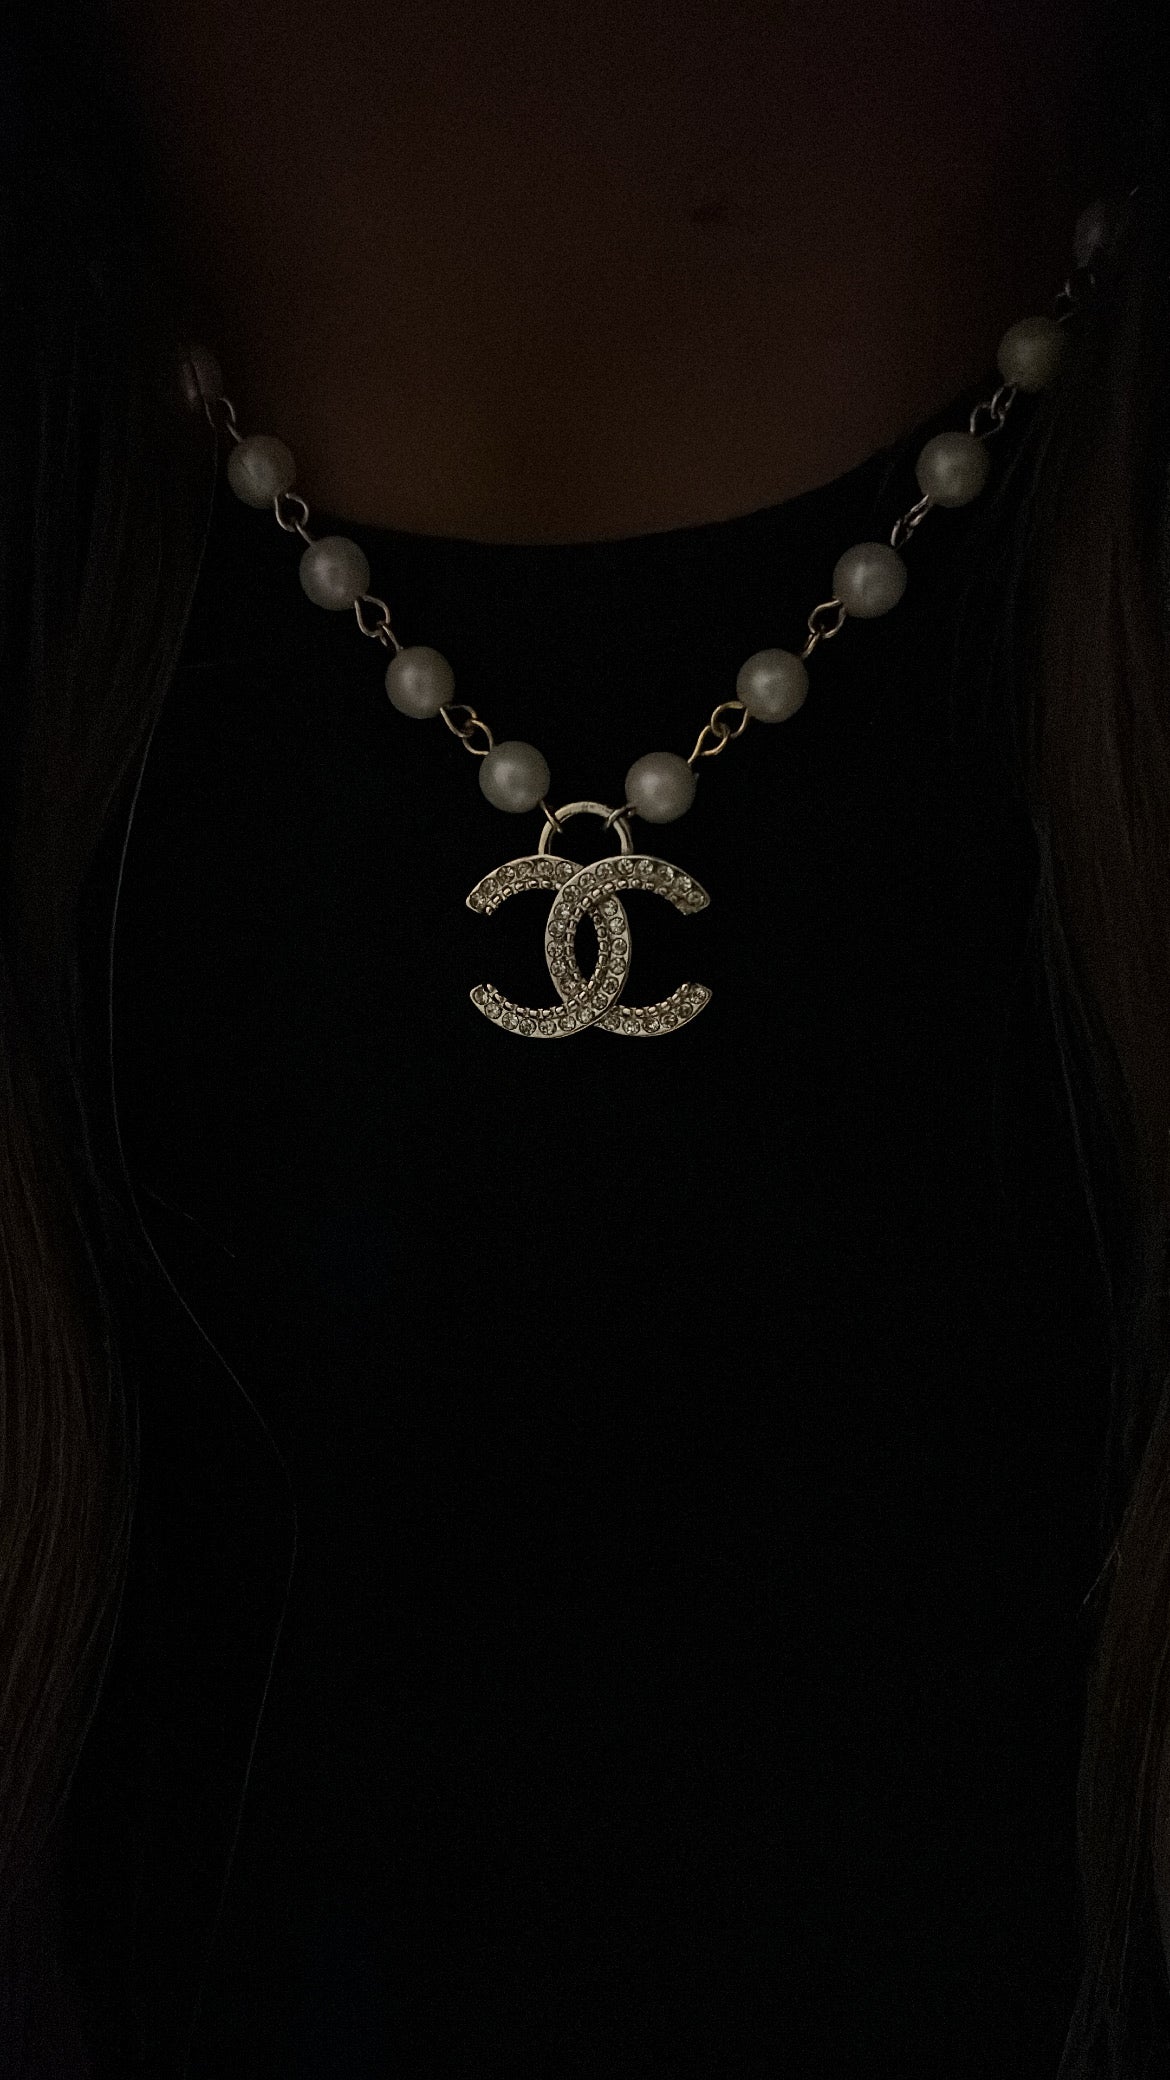 Reworked Chanel necklace | Chanel necklace, Necklace, Jewelry